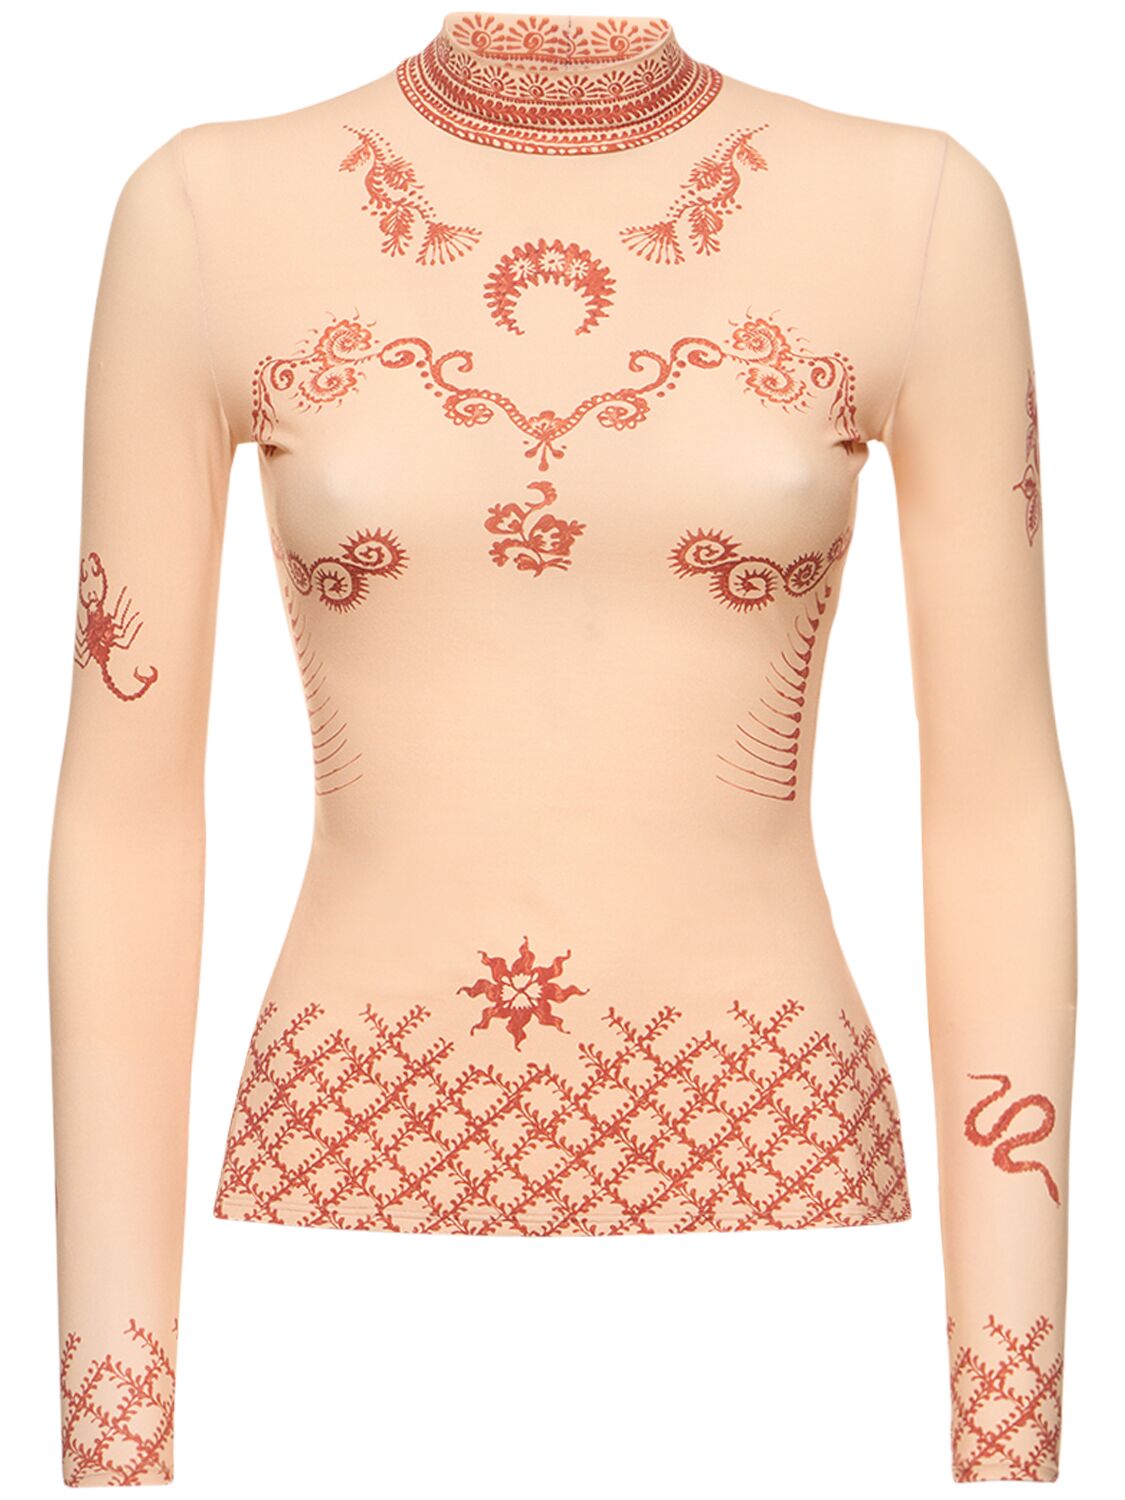 Henna Print Long Sleeved Second Skin Top – WOMEN > CLOTHING > TOPS